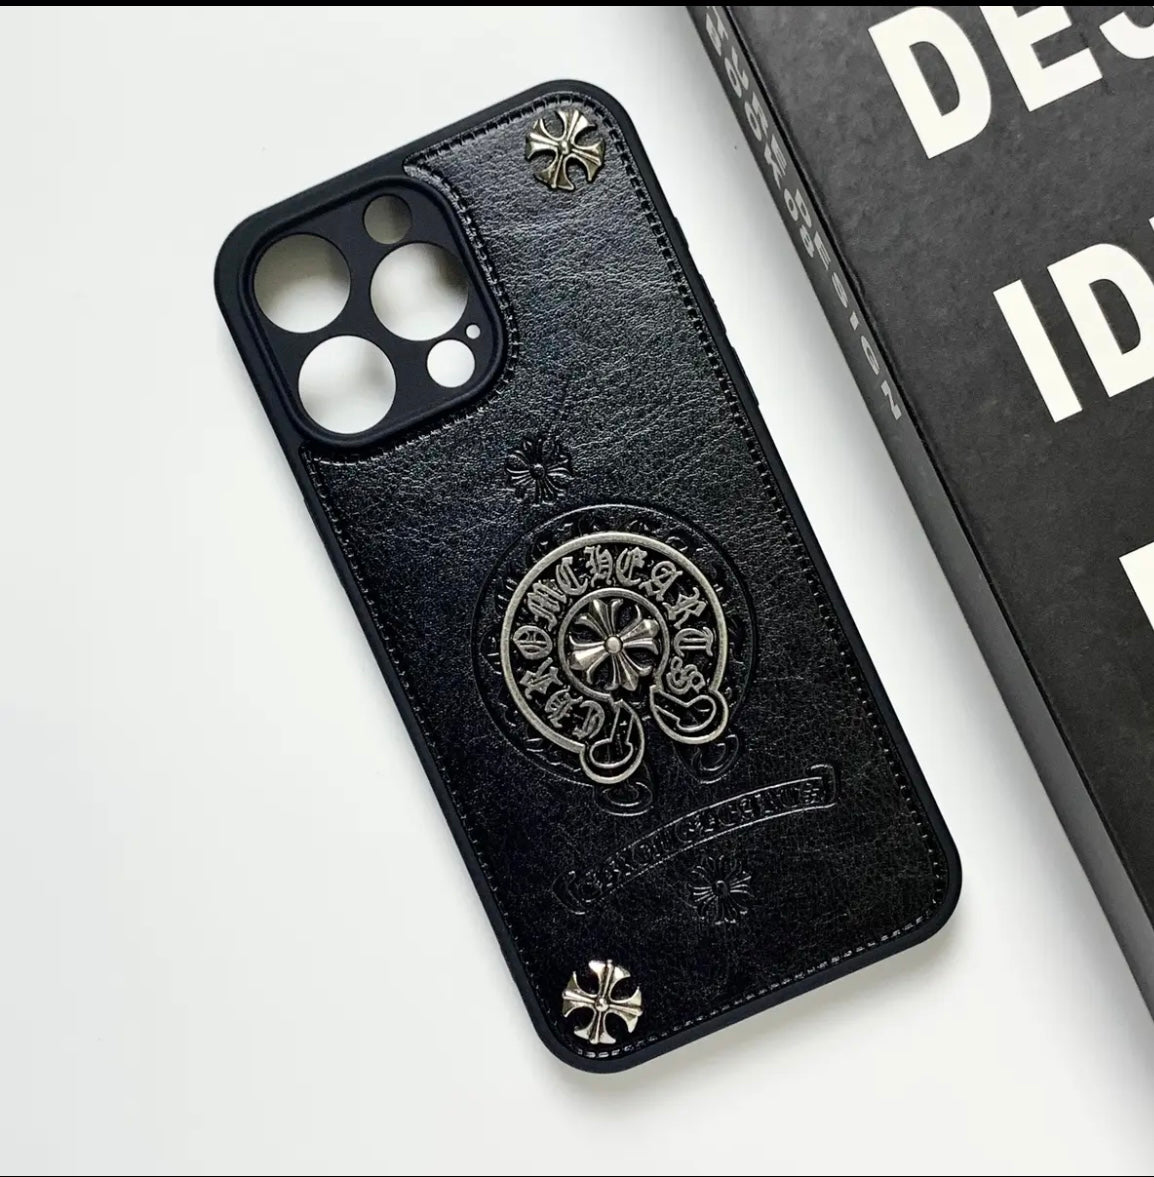 'CHROME HEARTS" IPHONE CASES